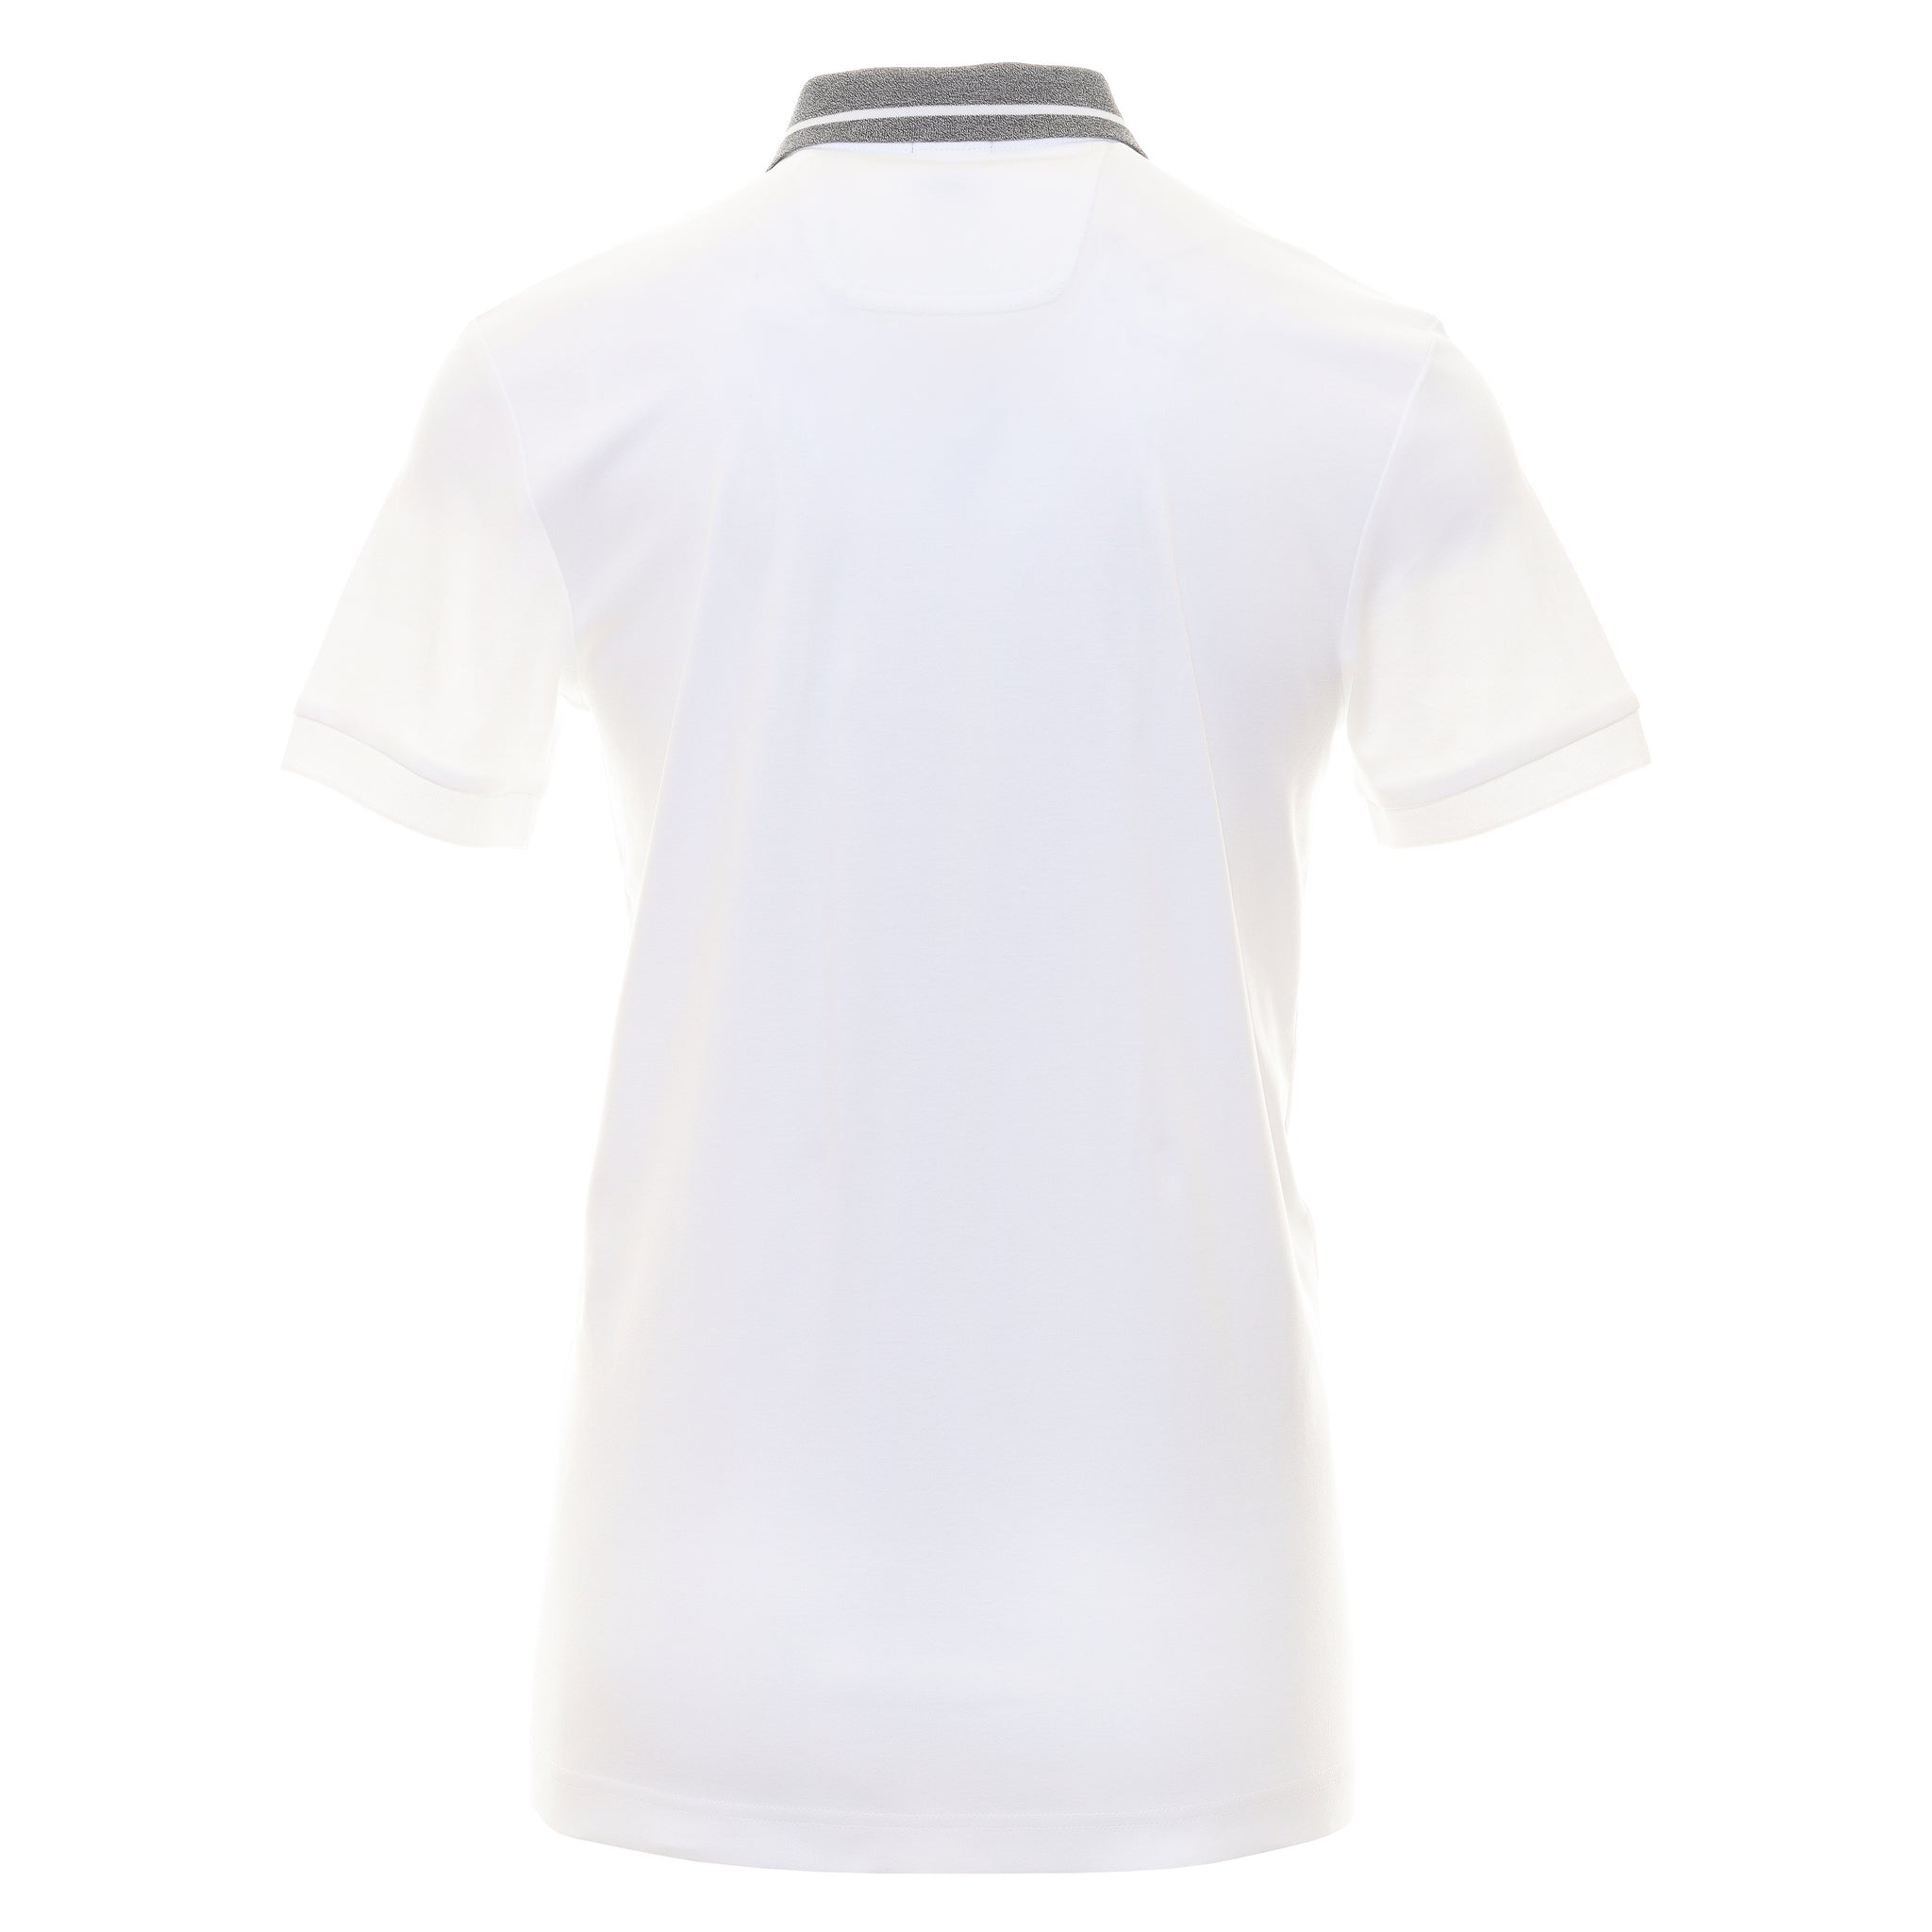 BOSS Paddy 1 Polo Shirt WI23 50501217 White 100 | Function18 | Restrictedgs